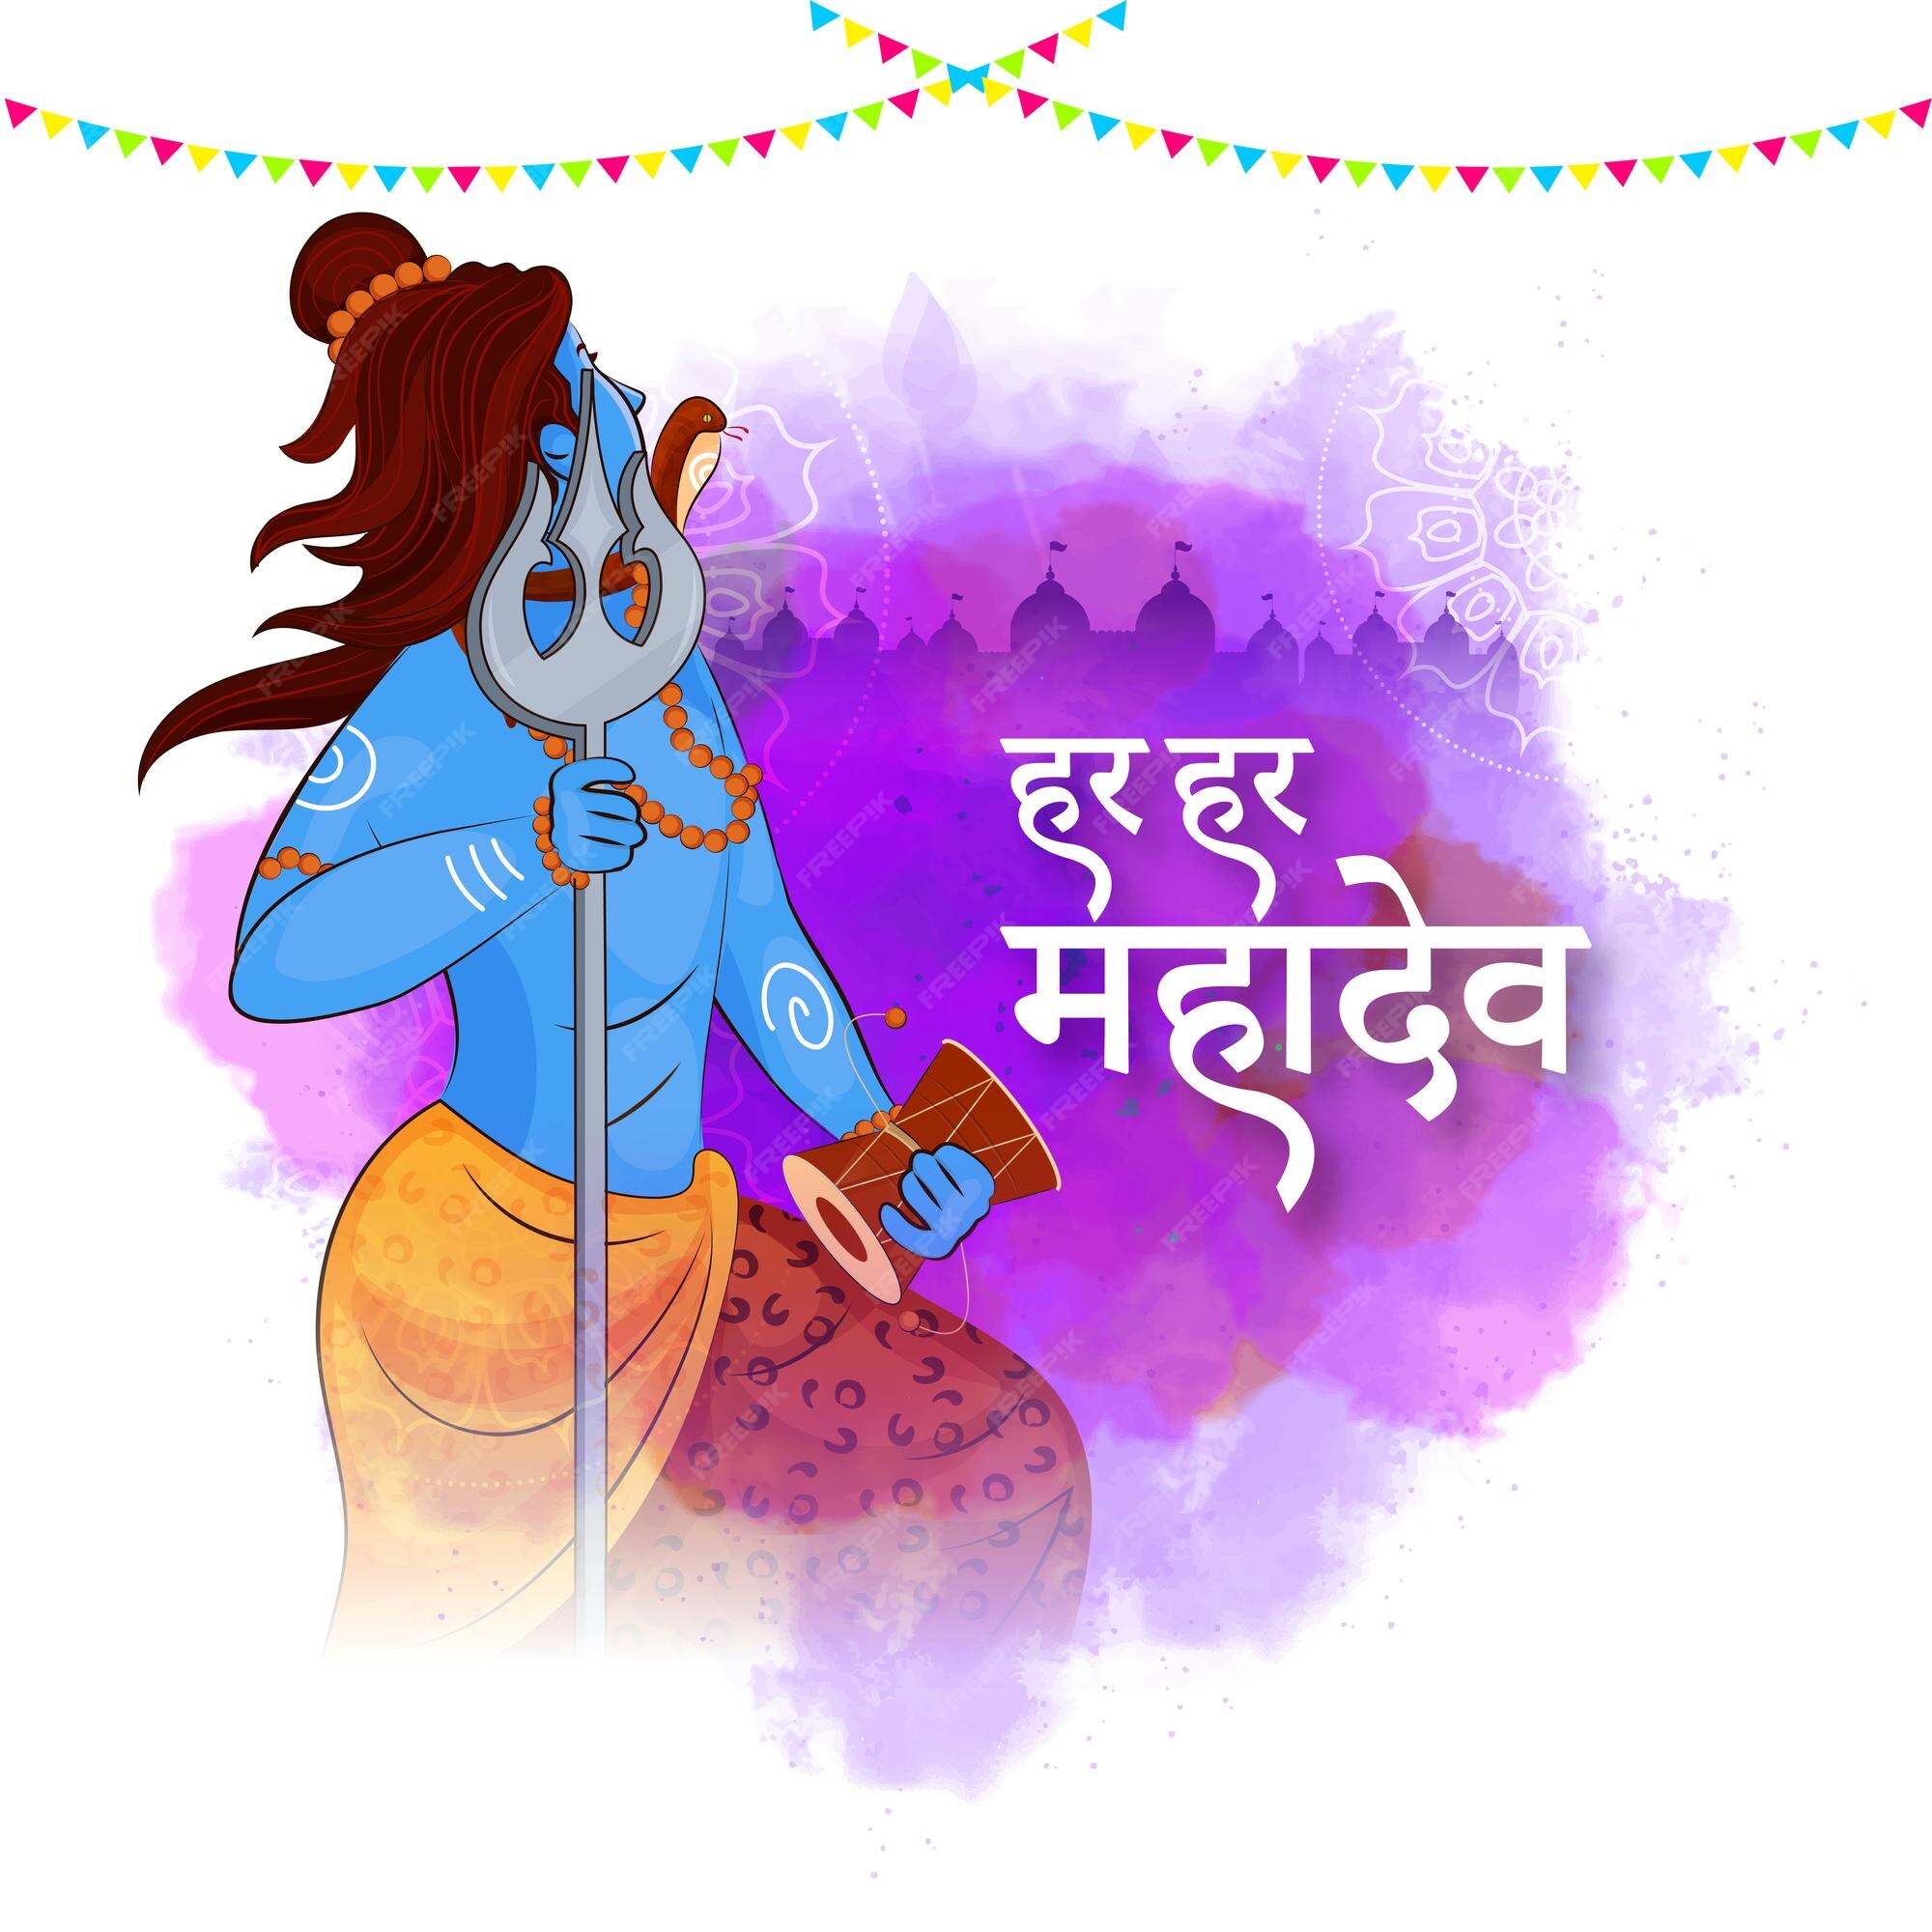 Premium Vector | Everywhere shiva har har mahadev text in hindi language  with side view of lord shiva character and purple watercolor effect on  white background